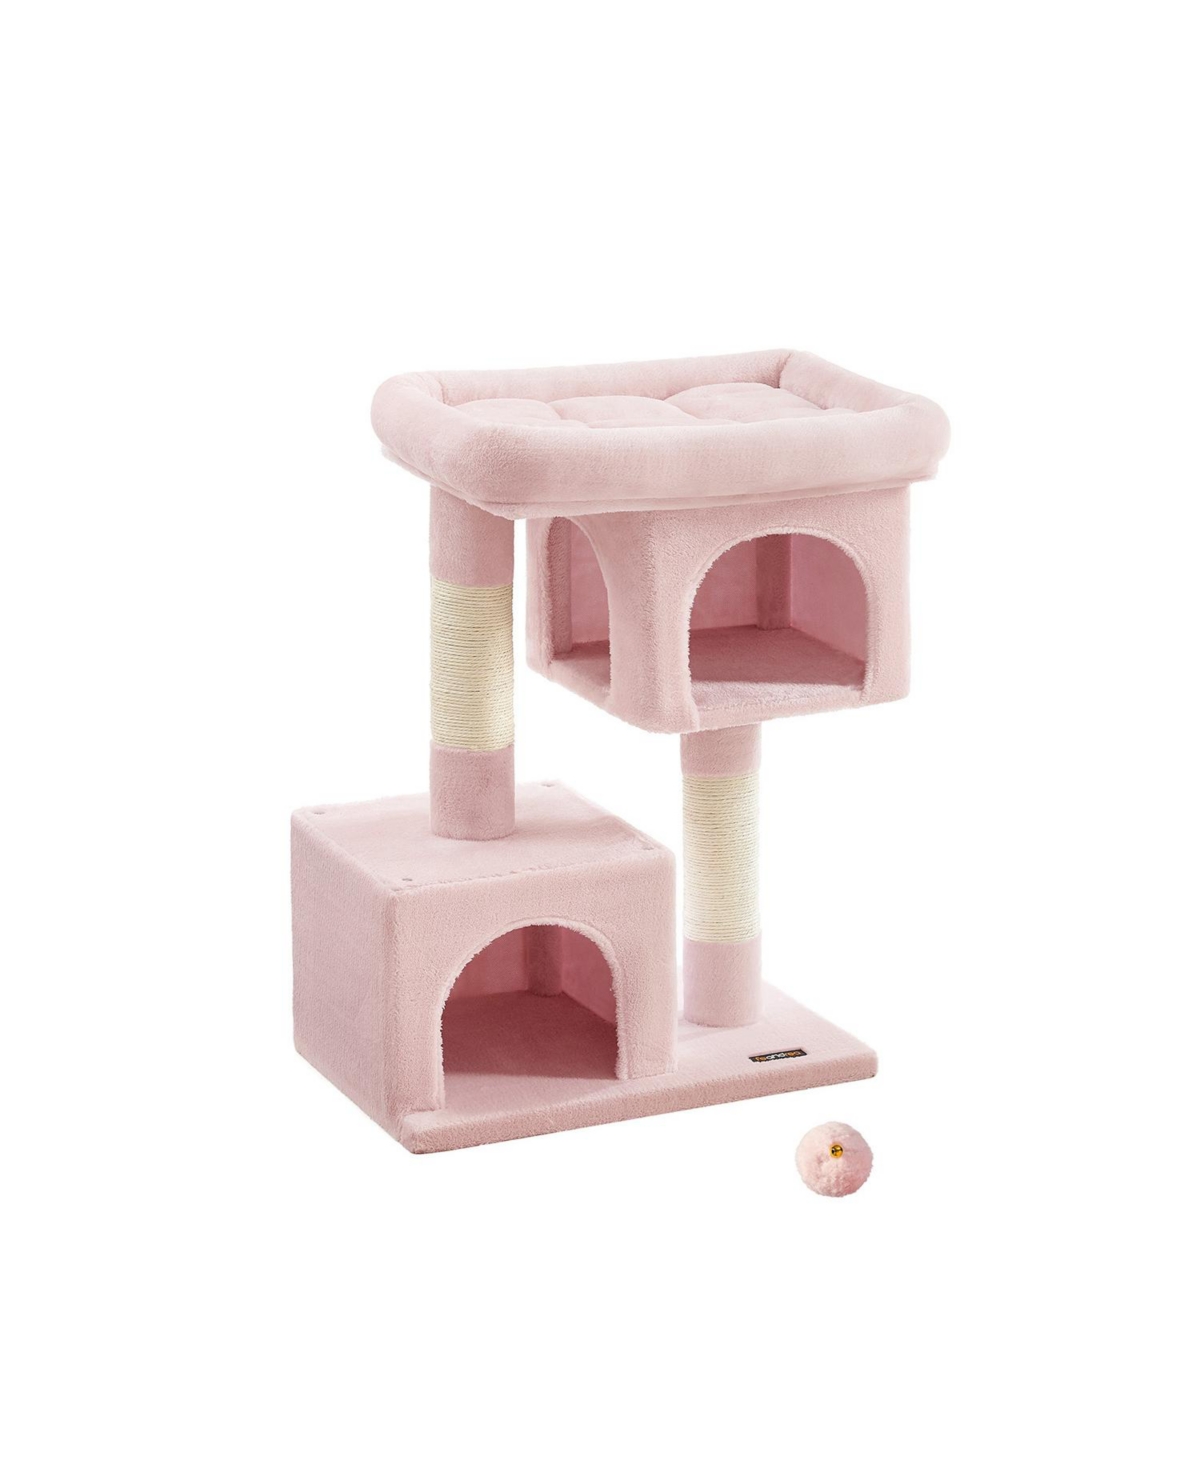 Cat Tree, 33.1-Inch Cat Tower, L, Cat Condo for Large Cats up to 16 lb, Large Cat Perch, 2 Cat Caves, Scratching Post - White